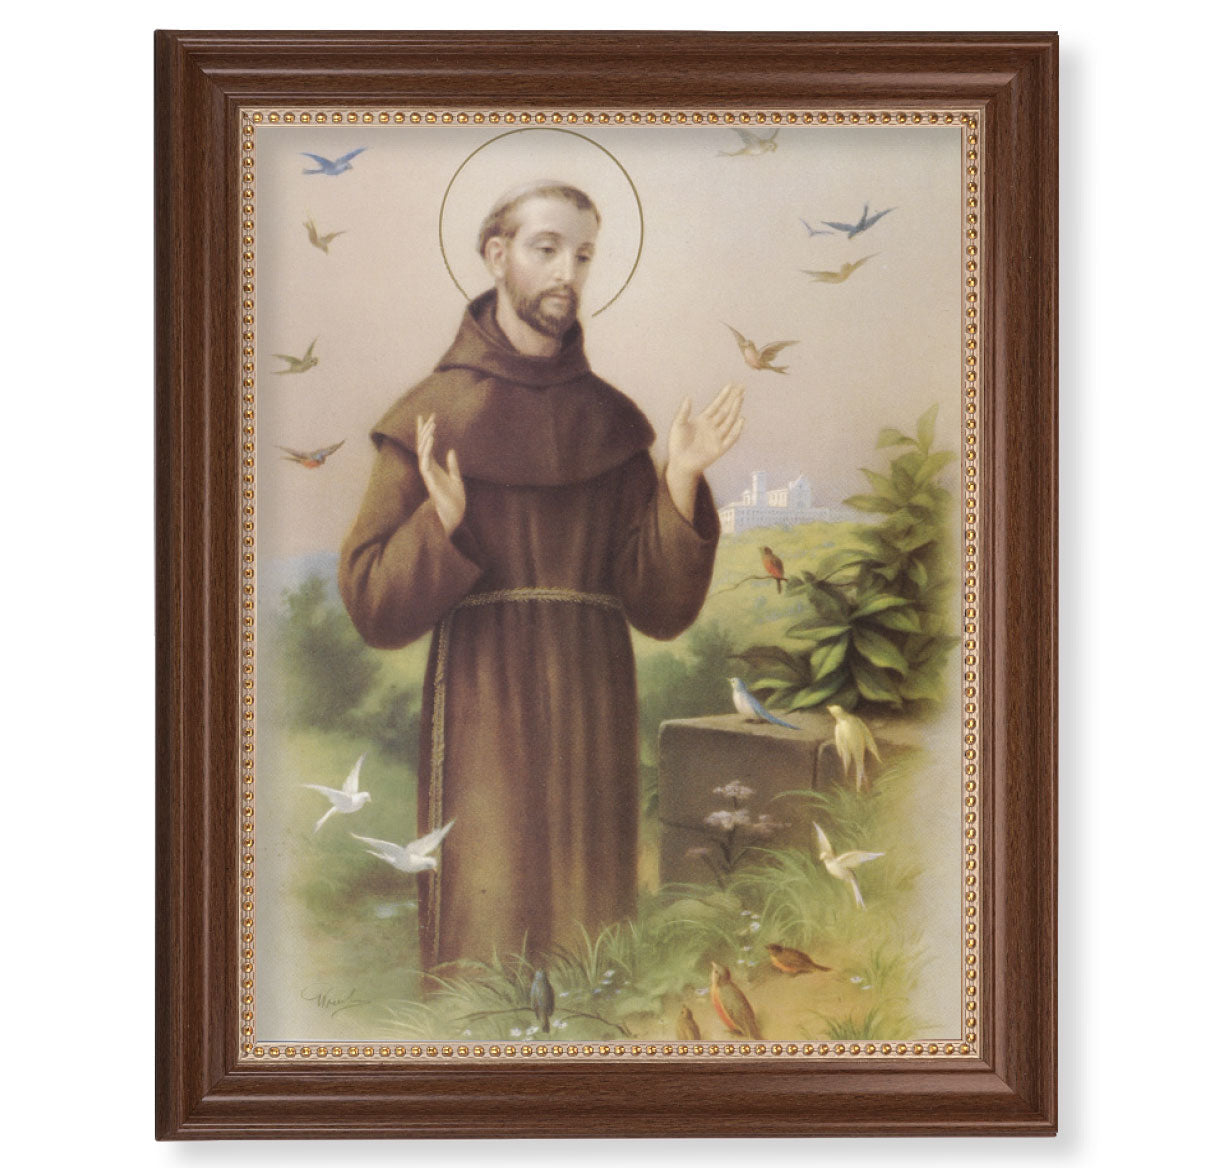 St. Francis Picture Framed Wall Art Decor, Extra Large, Classic Dark Walnut Finished Frame with Gold Beaded Lip